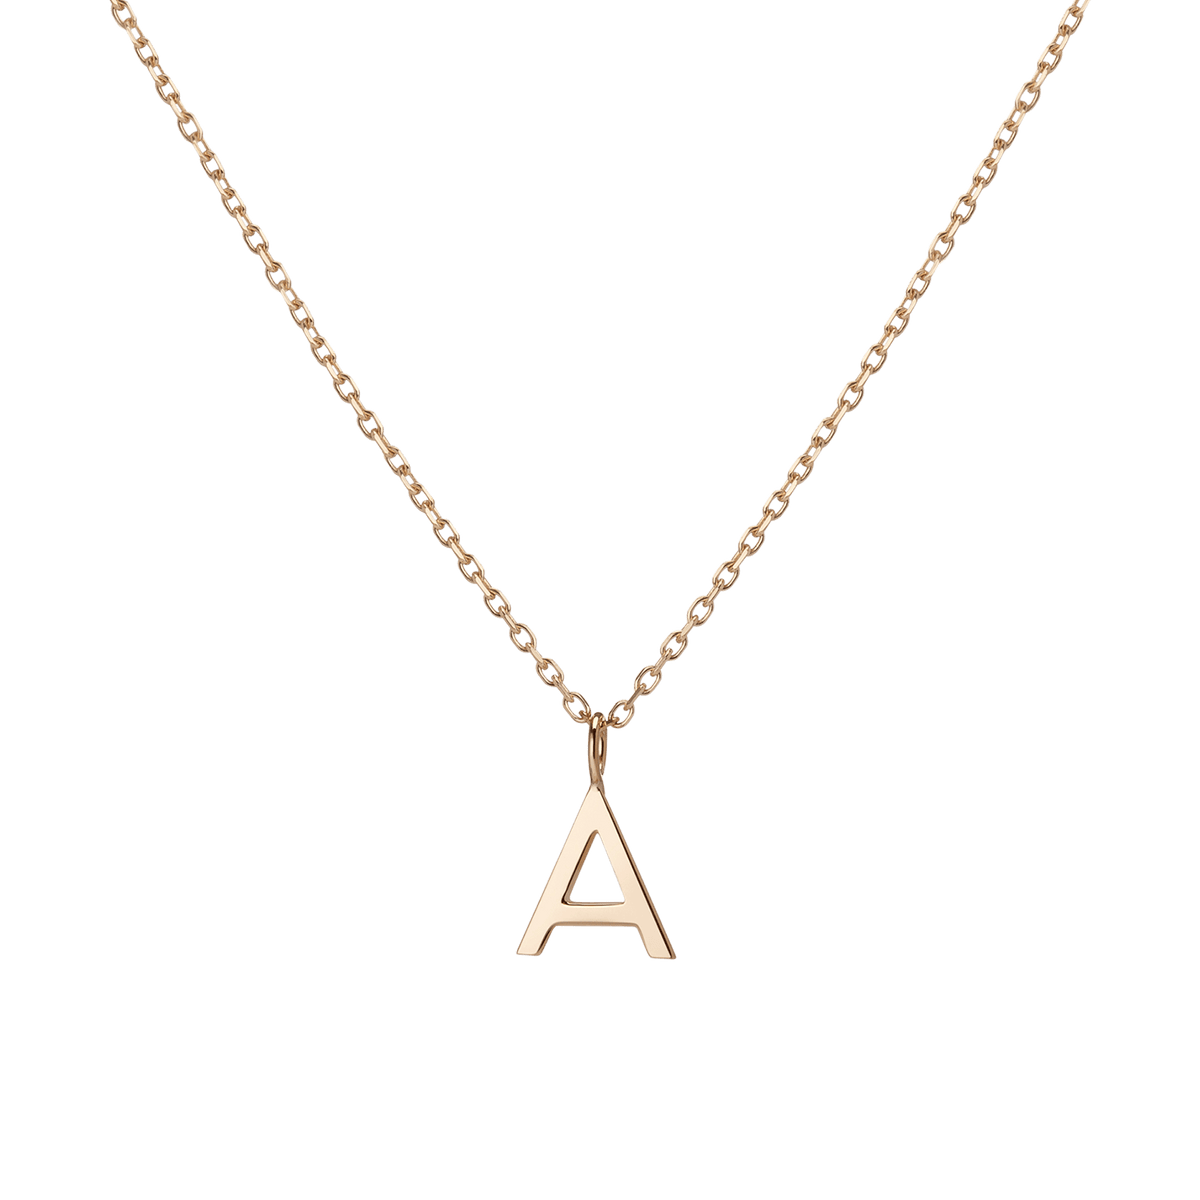 Aurate New York Classic Gold Letter Necklace, 14K Yellow Gold